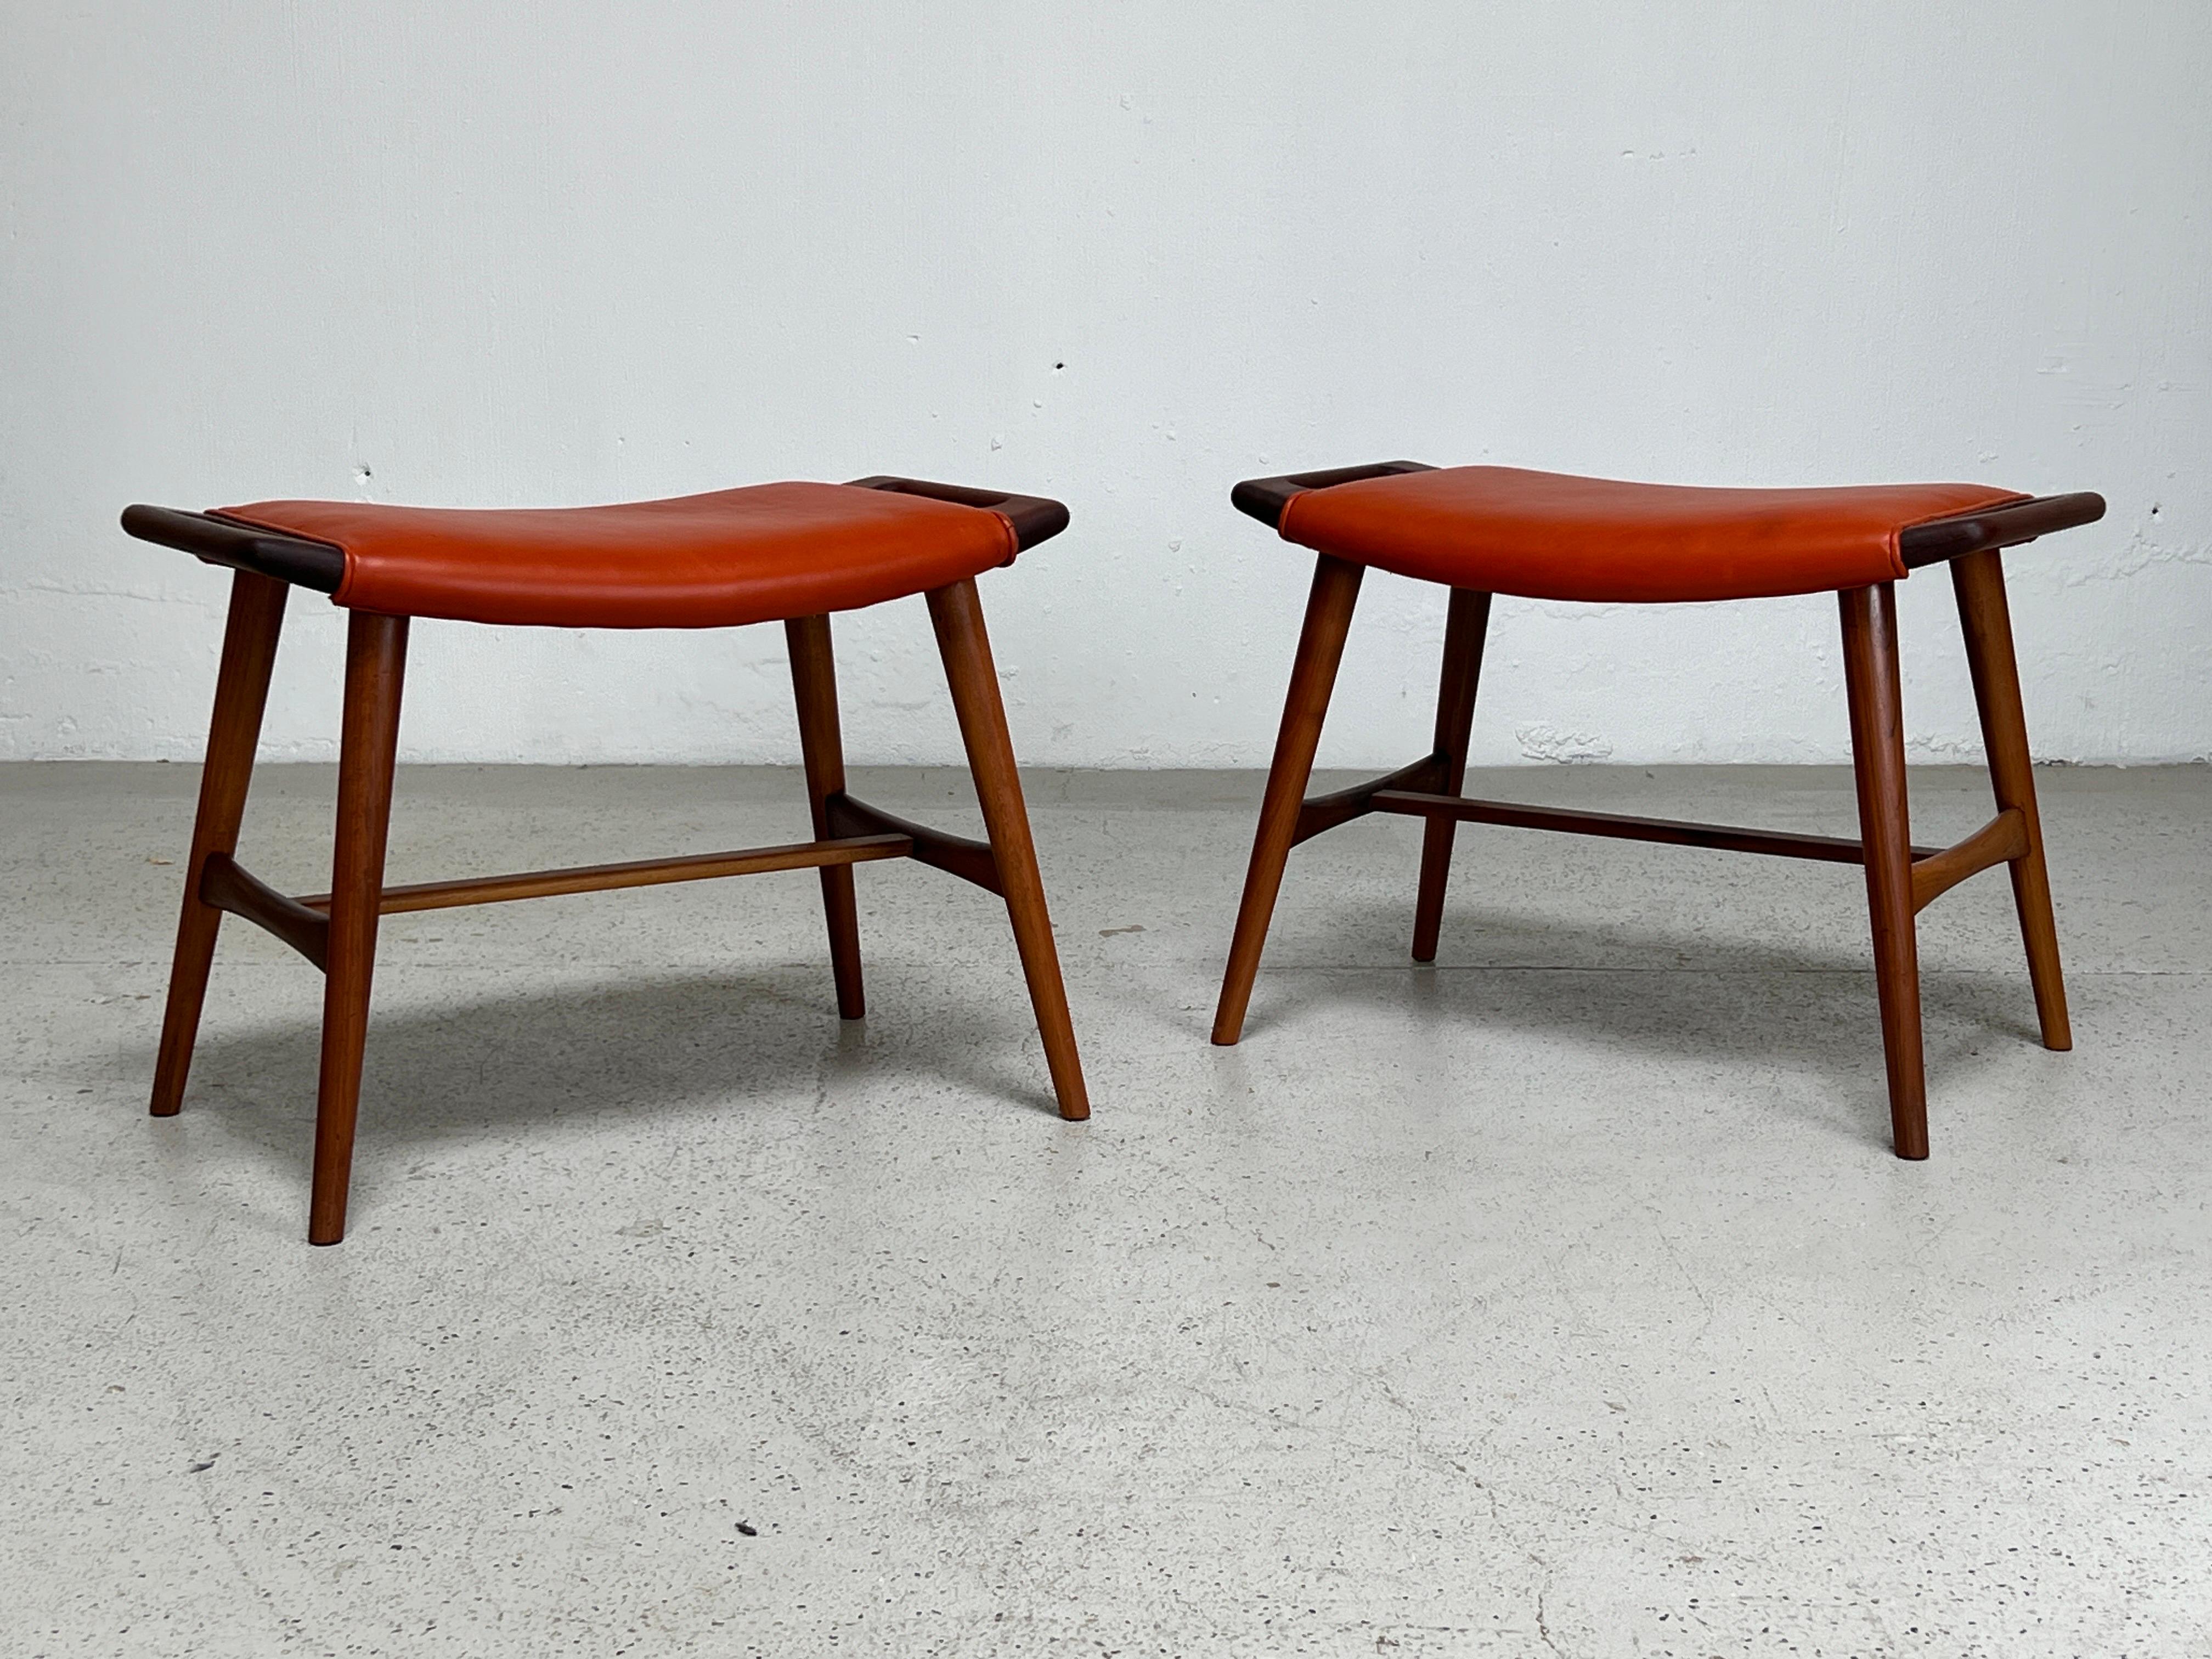 A pair of teak and leather AP-30 stools designed by Hans Wegner for AP-Stolen.